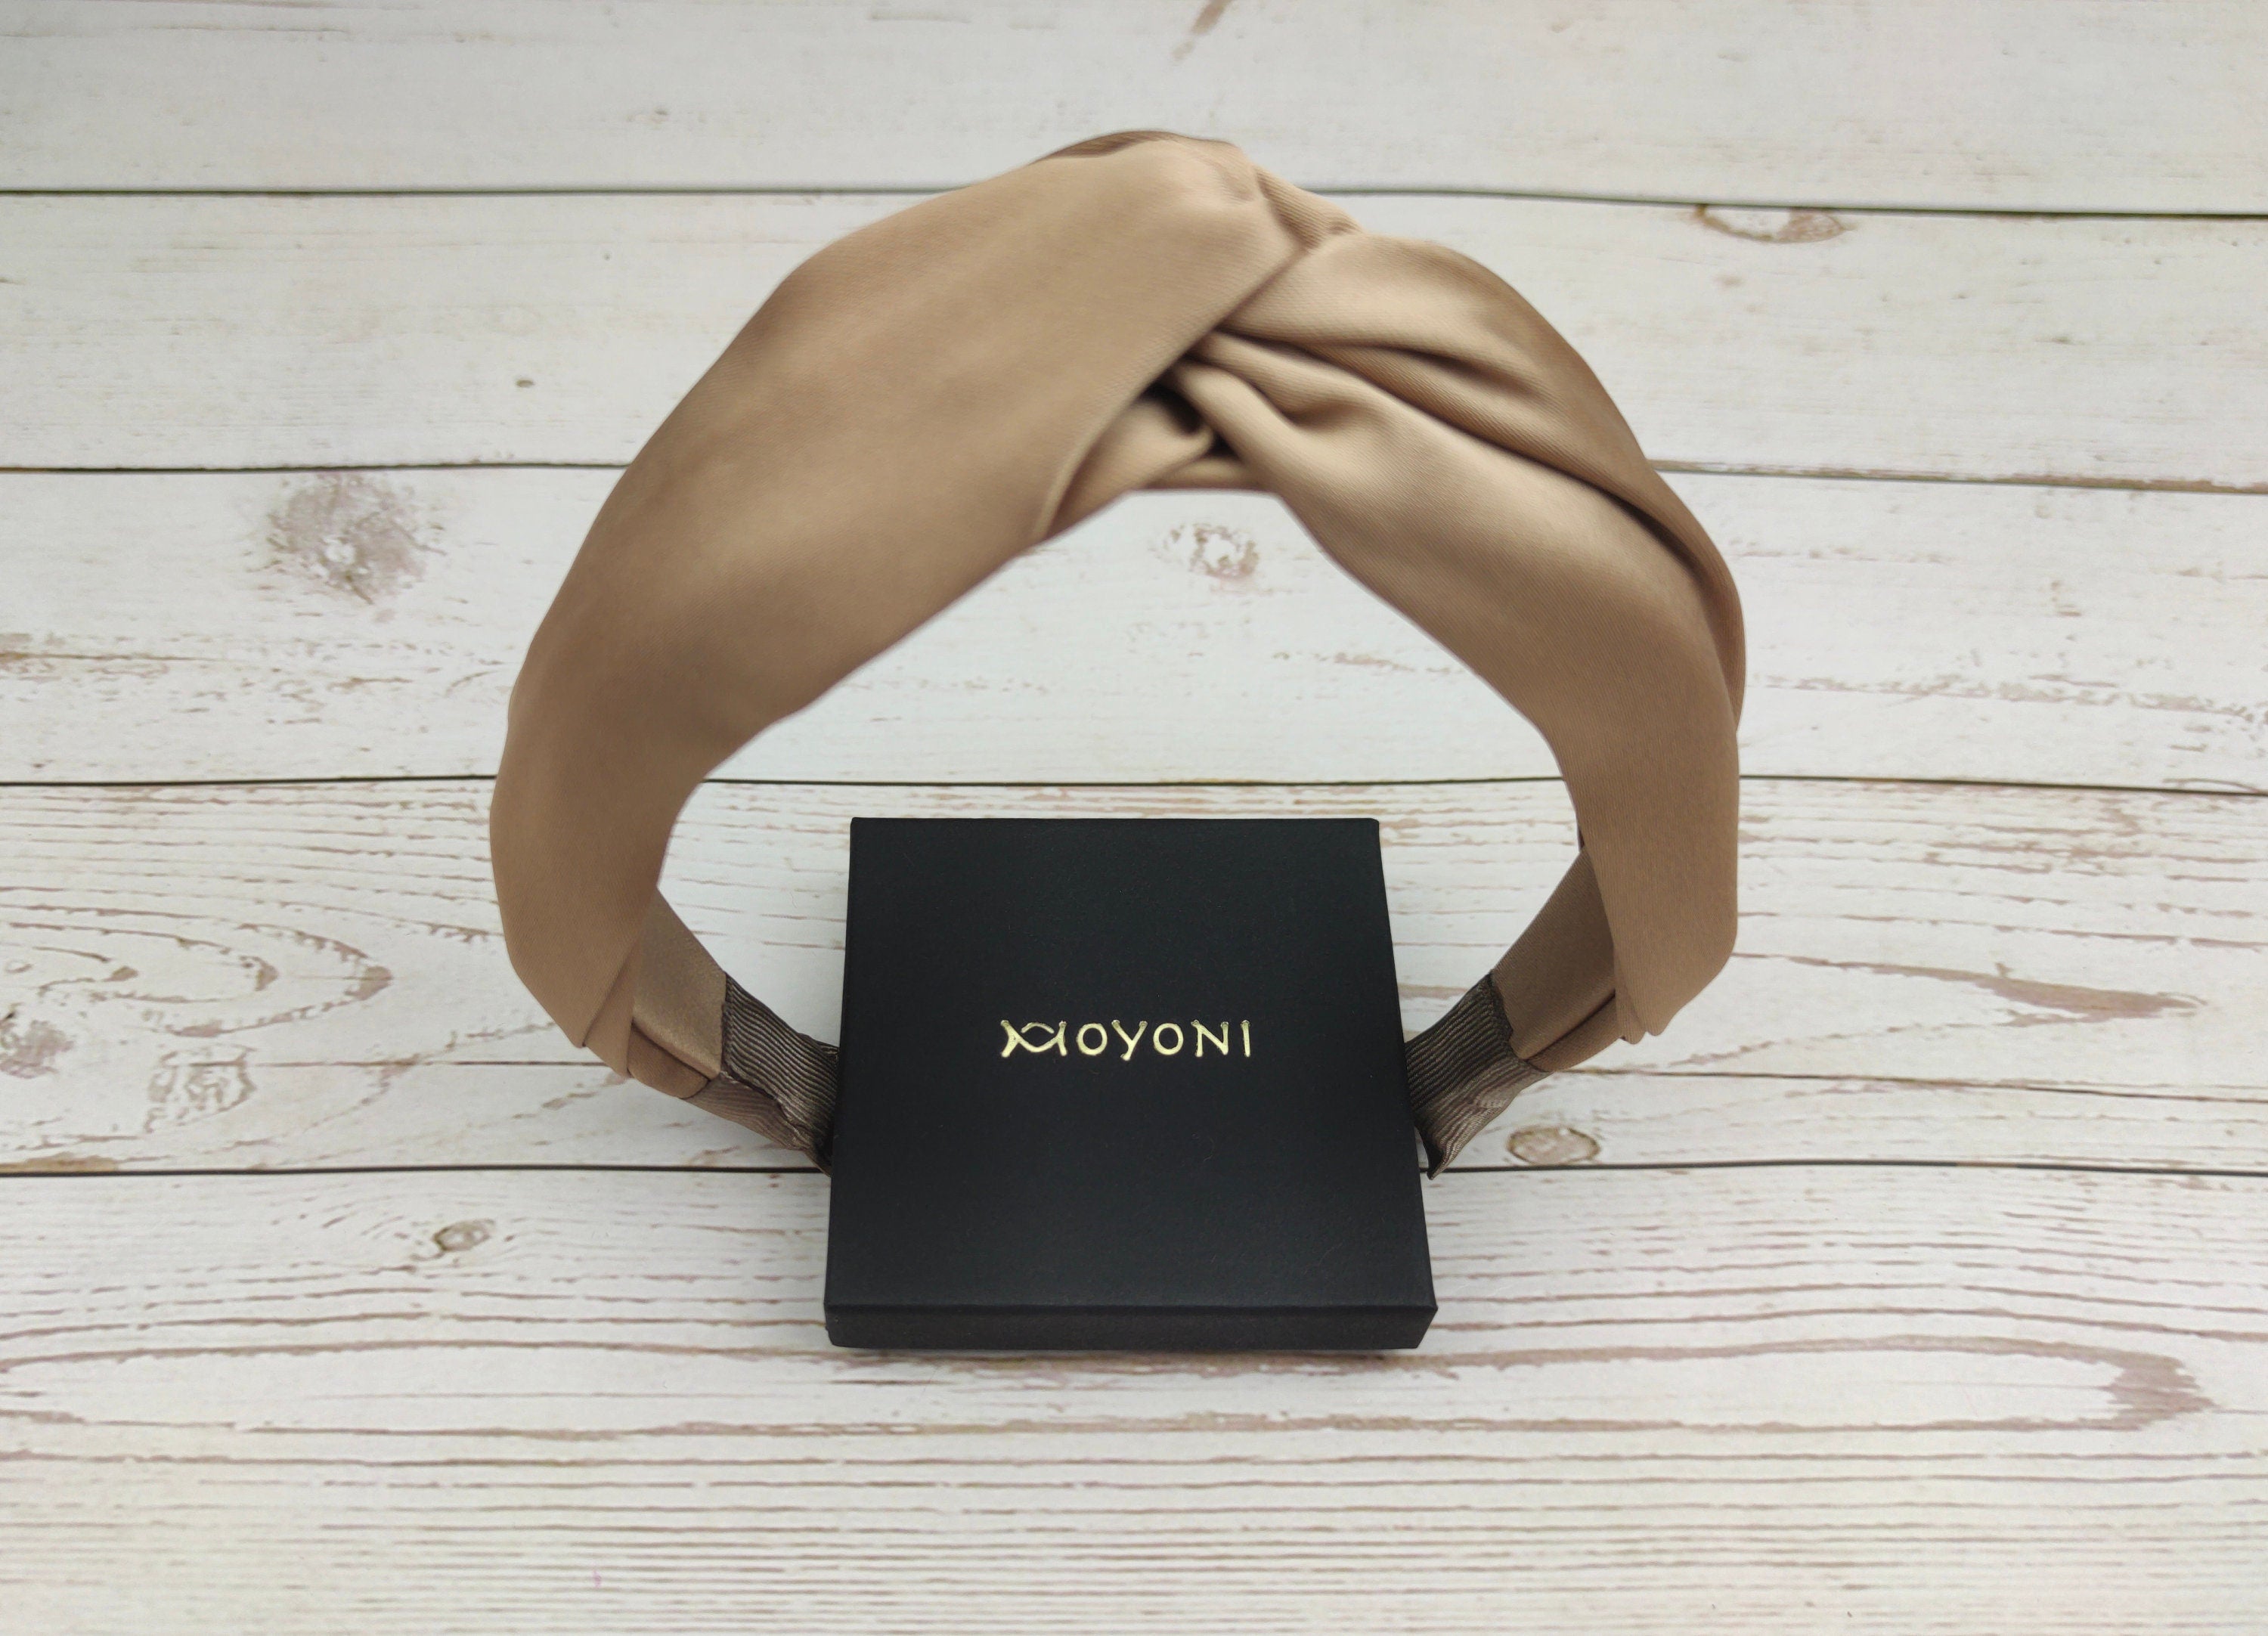 Stay cool and stylish this summer with our Beige Satin Headband. This headband features a knotted design and a gorgeous cream color, perfect for all your summer activities. The soft and luxurious satin material is comfortable to wear all day long.